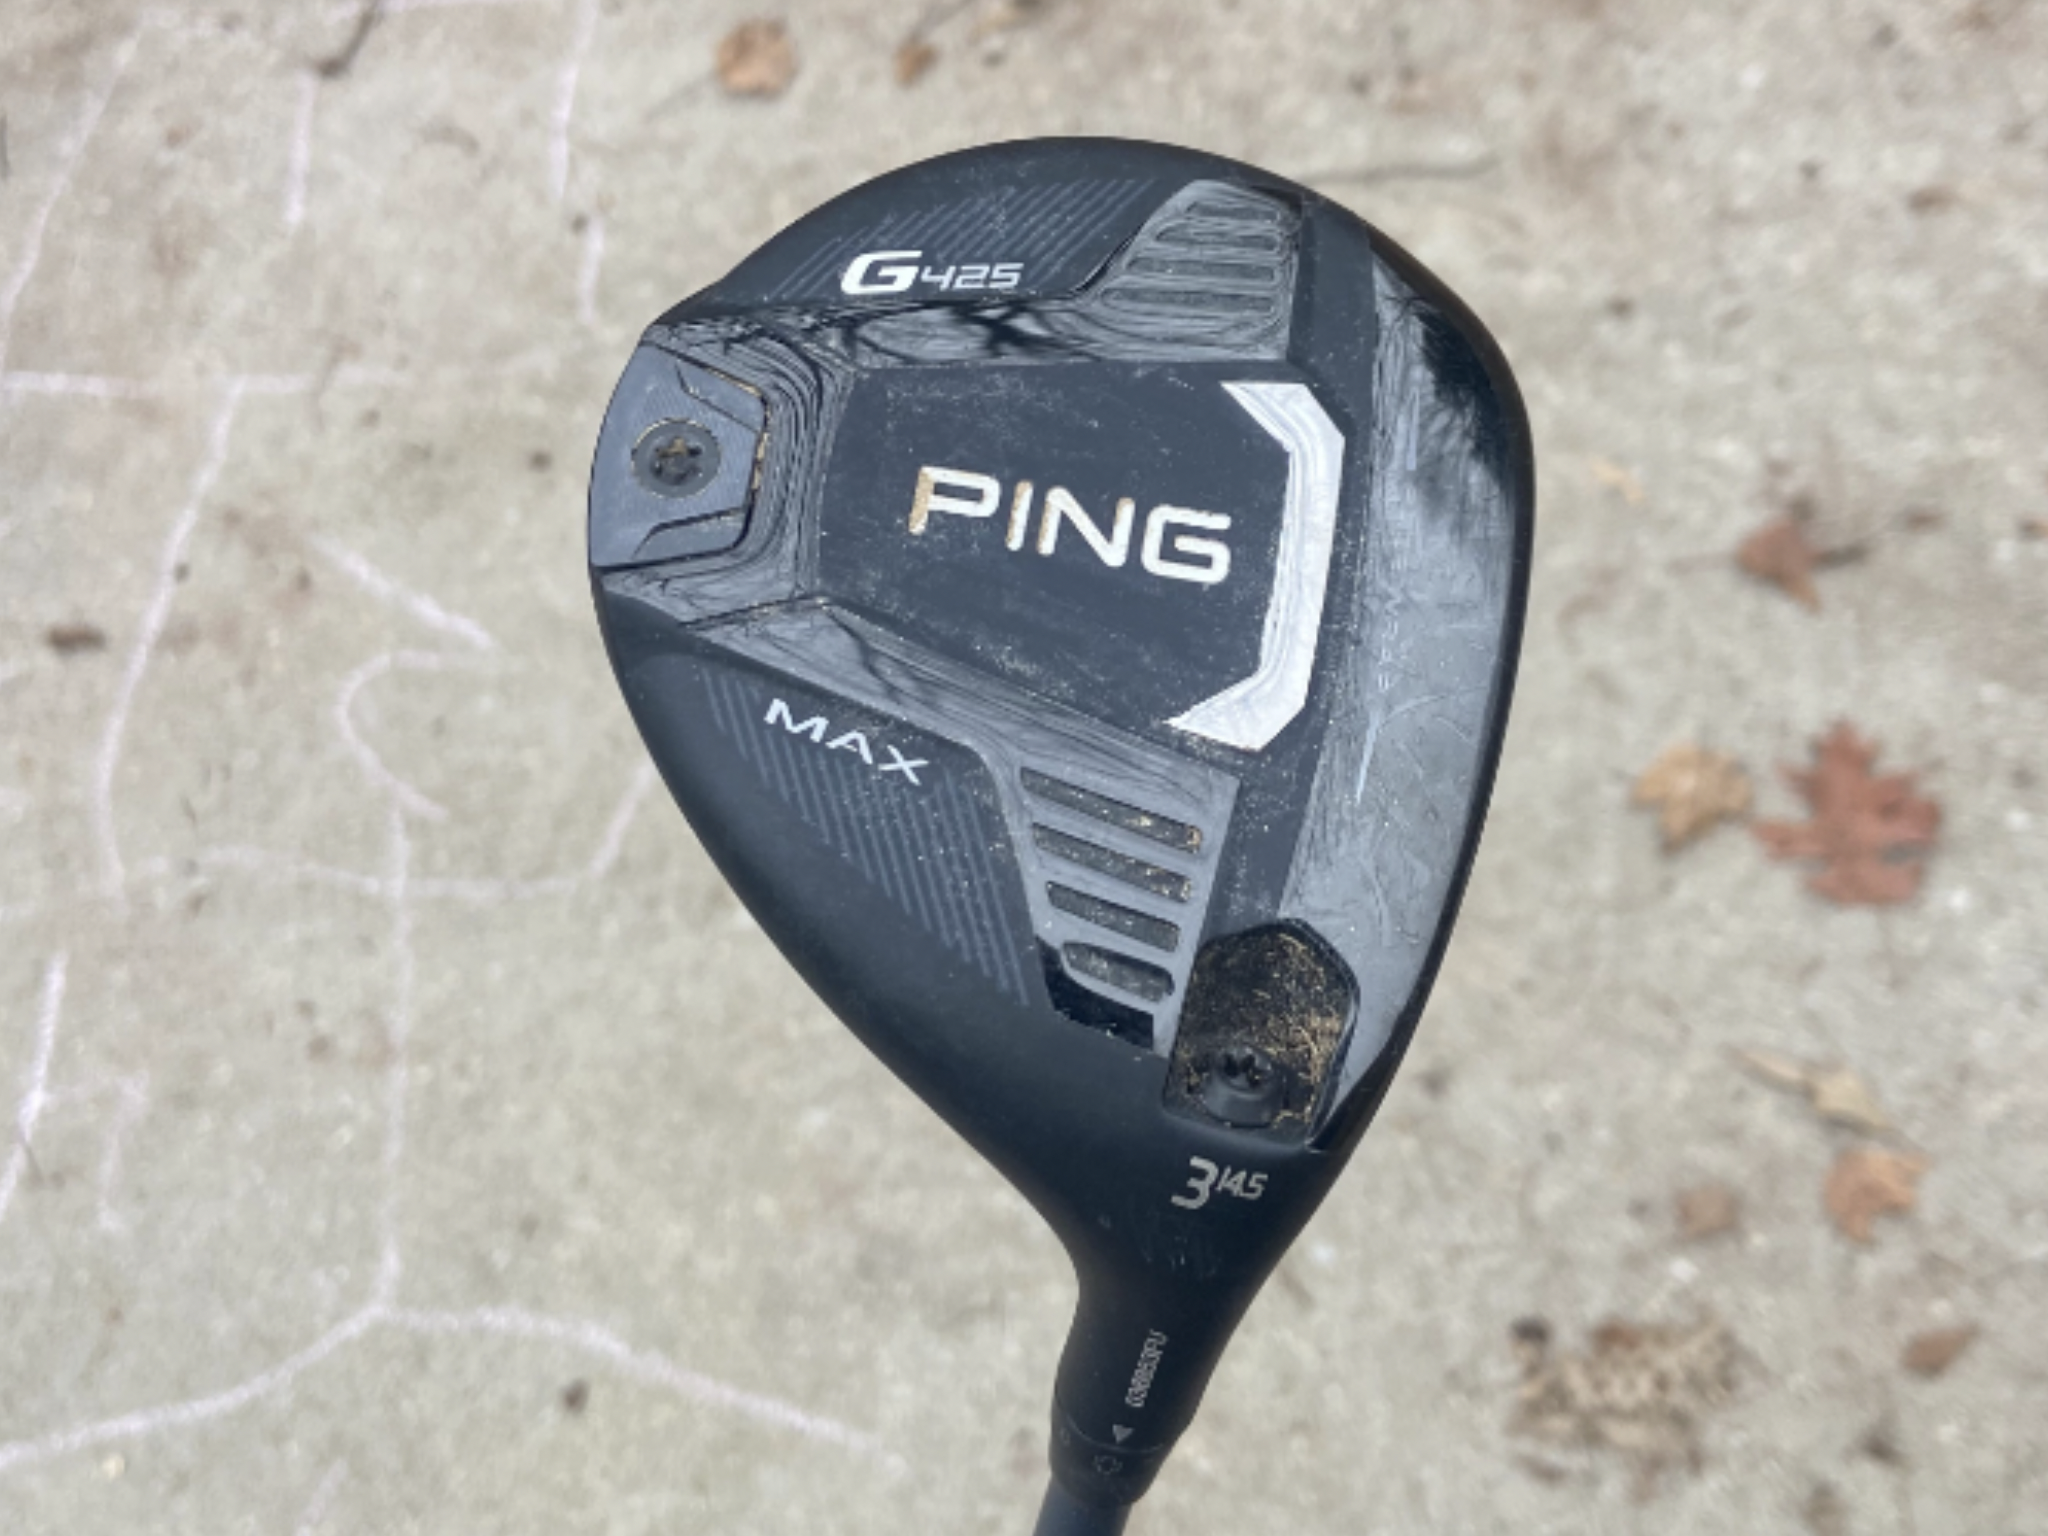 Coolest thing for sale in the GolfWRX Classifieds (1/11/22): Ping